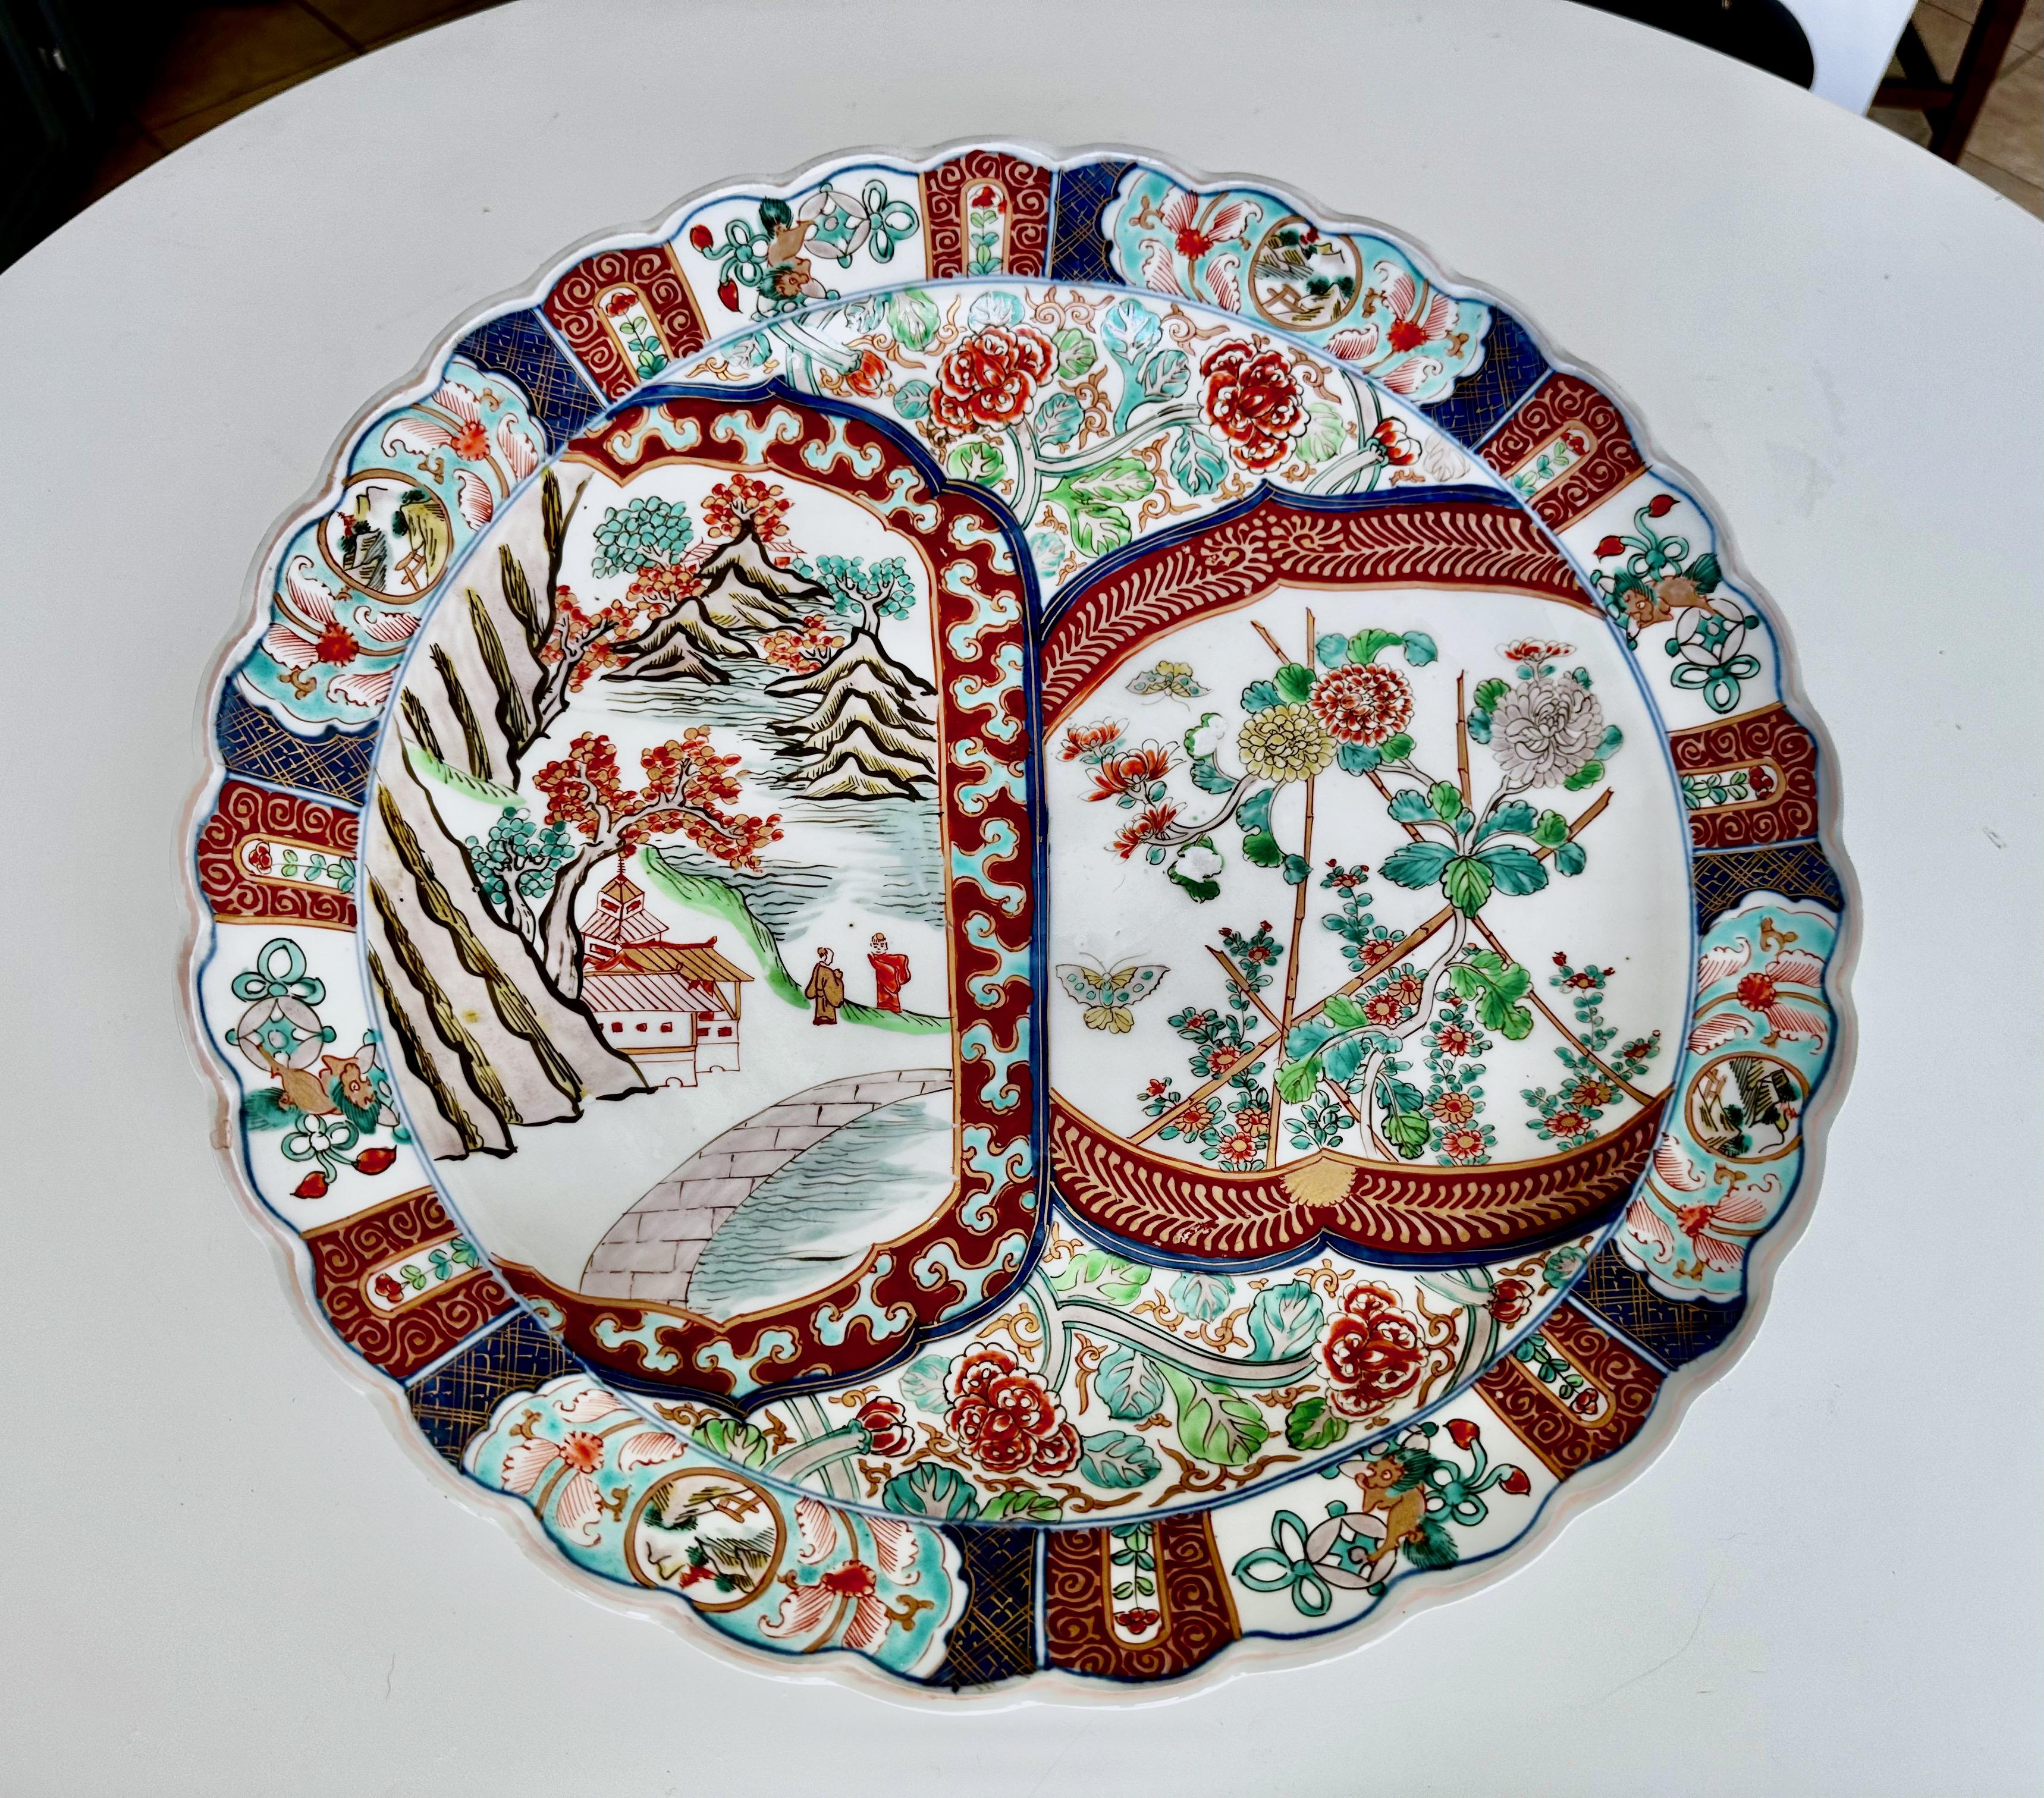 Hand painted porcelain Japanese Imari charger scallop edge plate with figures, buildings, trees, mountains, birds and floral design.